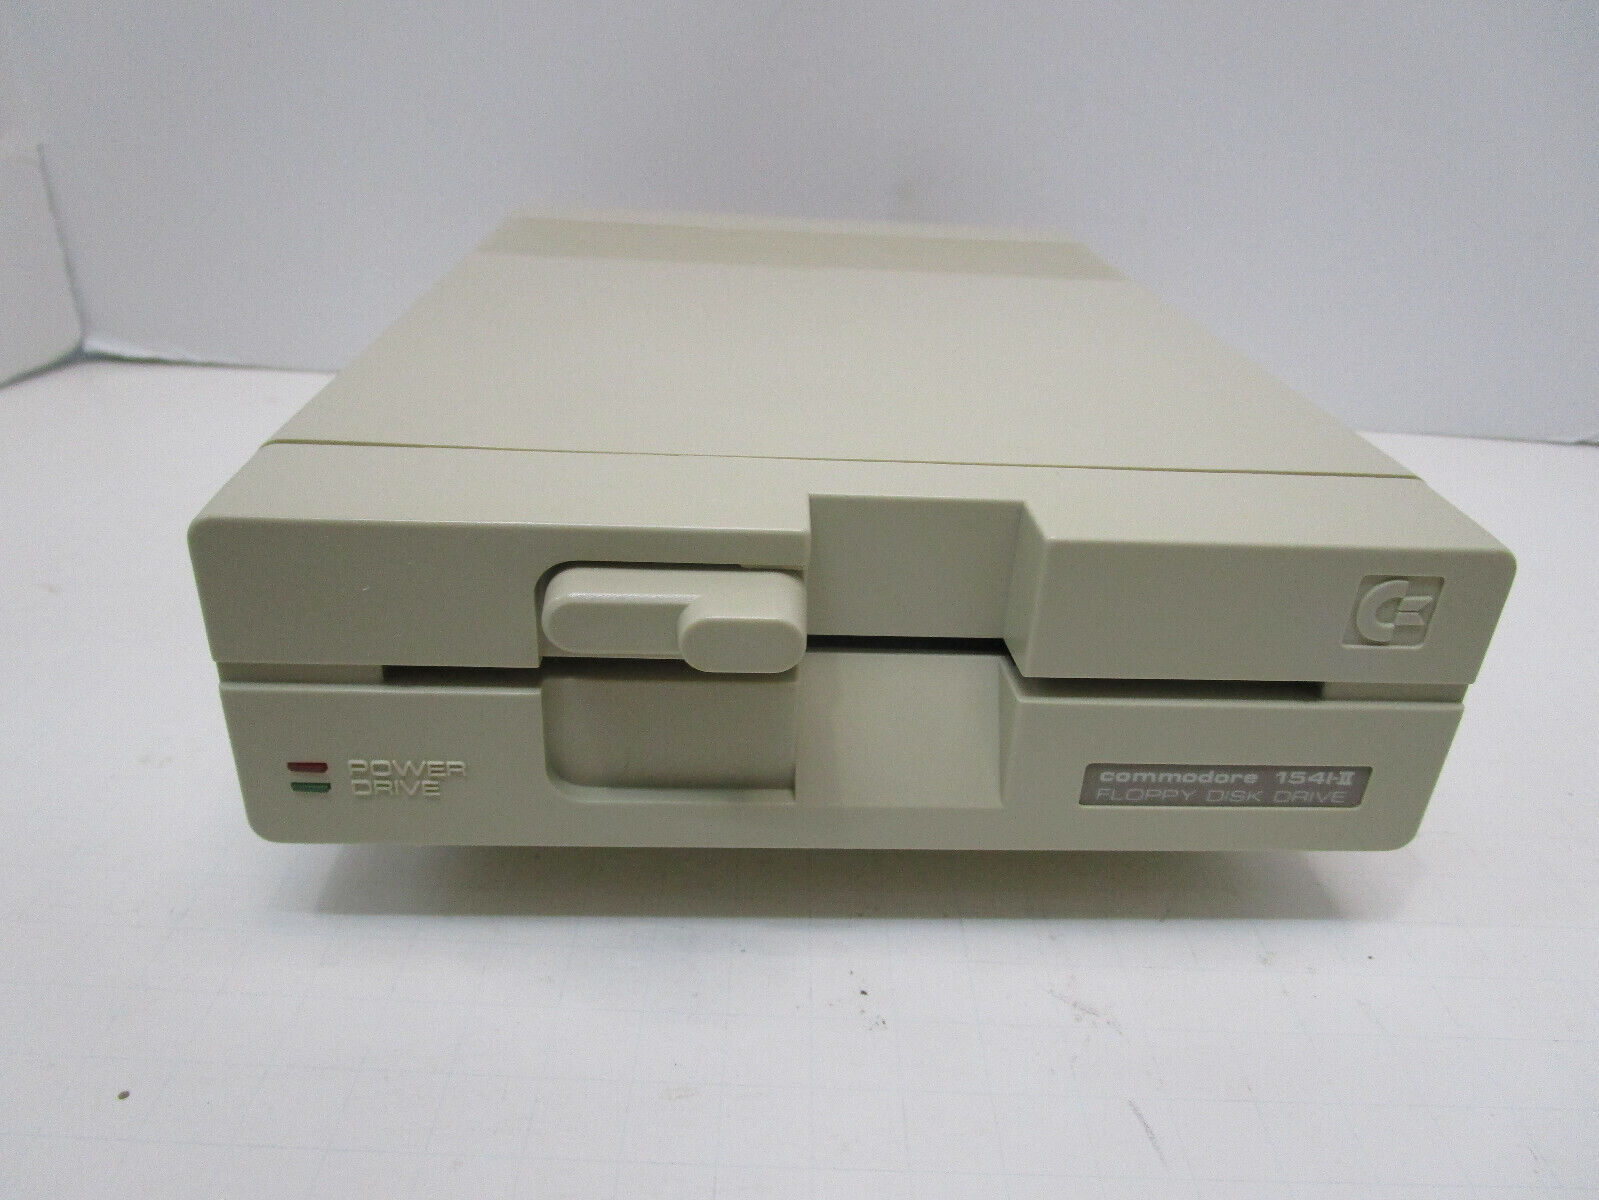 COMMODORE 1541-II FLOPPY DRIVE FOR C64 64C VIC-20 C16 PLUS/4 128 TSTED/WRKNG L96